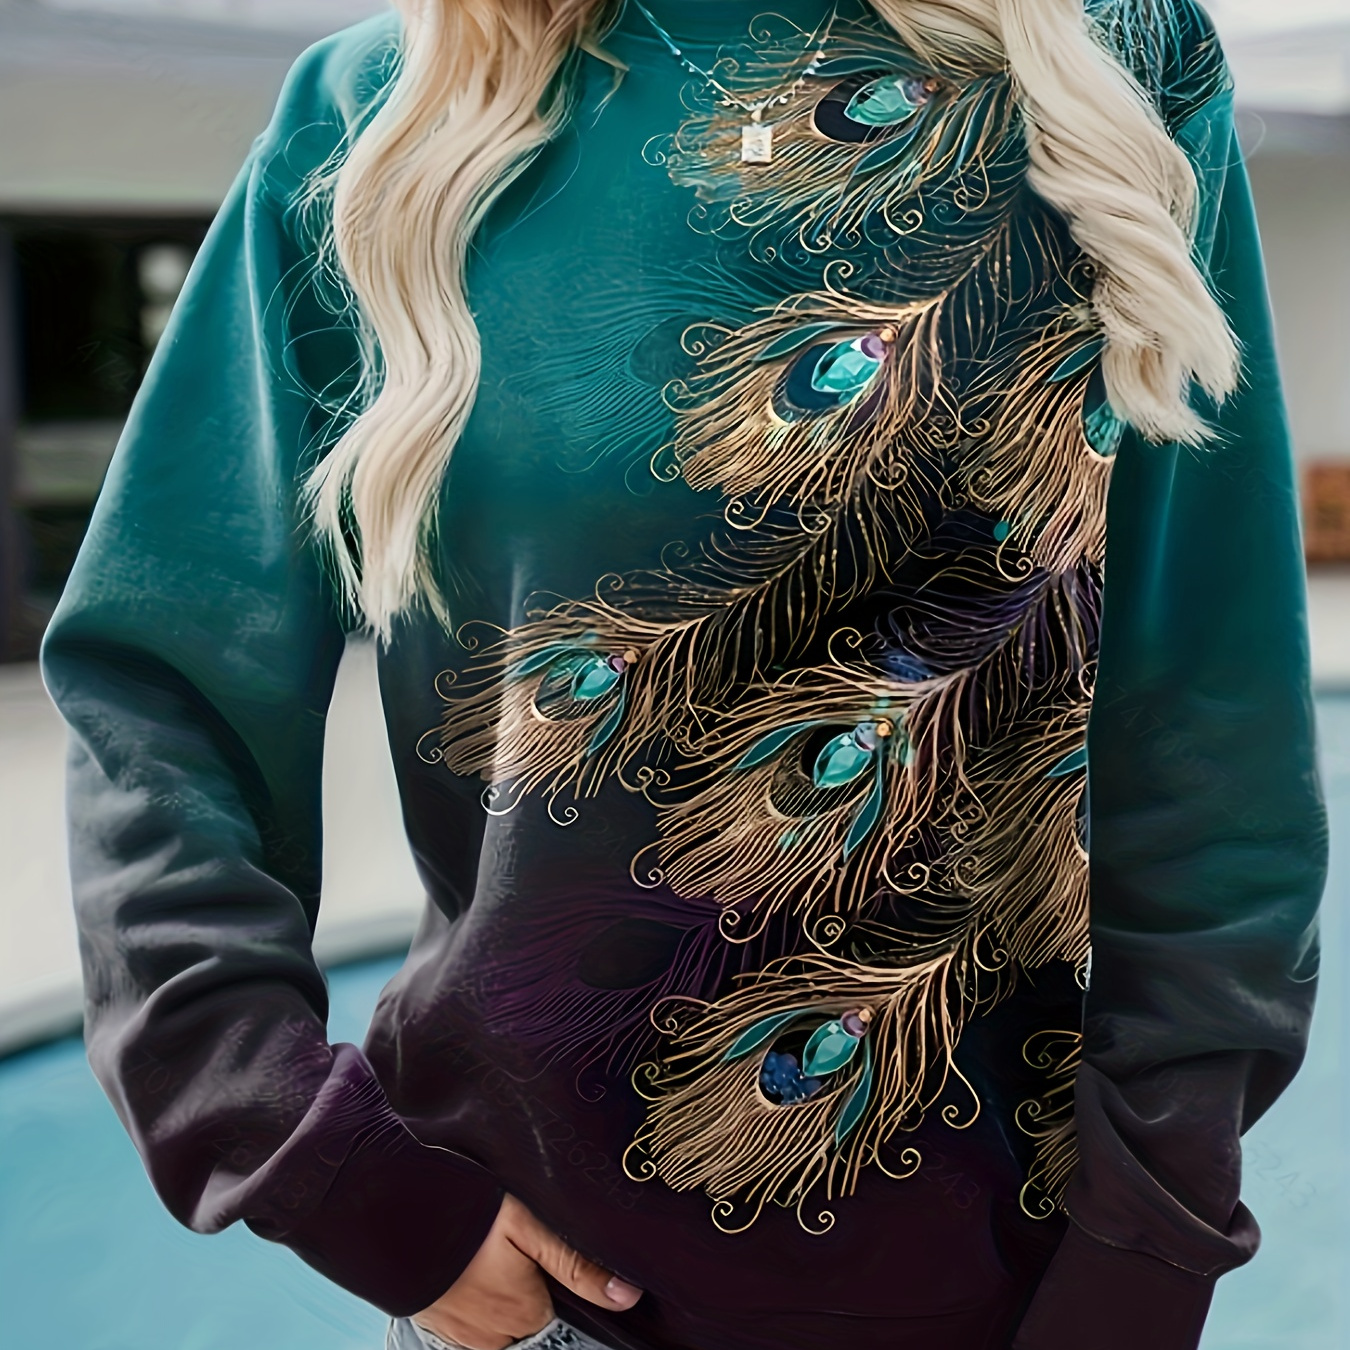 

Plus Size Casual Sweatshirt, Women's Plus Peacock Print Ombre Long Sleeve Crew Neck Slight Stretch Pullover Sweatshirt, Casual Tops For Fall & Winter, Plus Size Women's Clothing